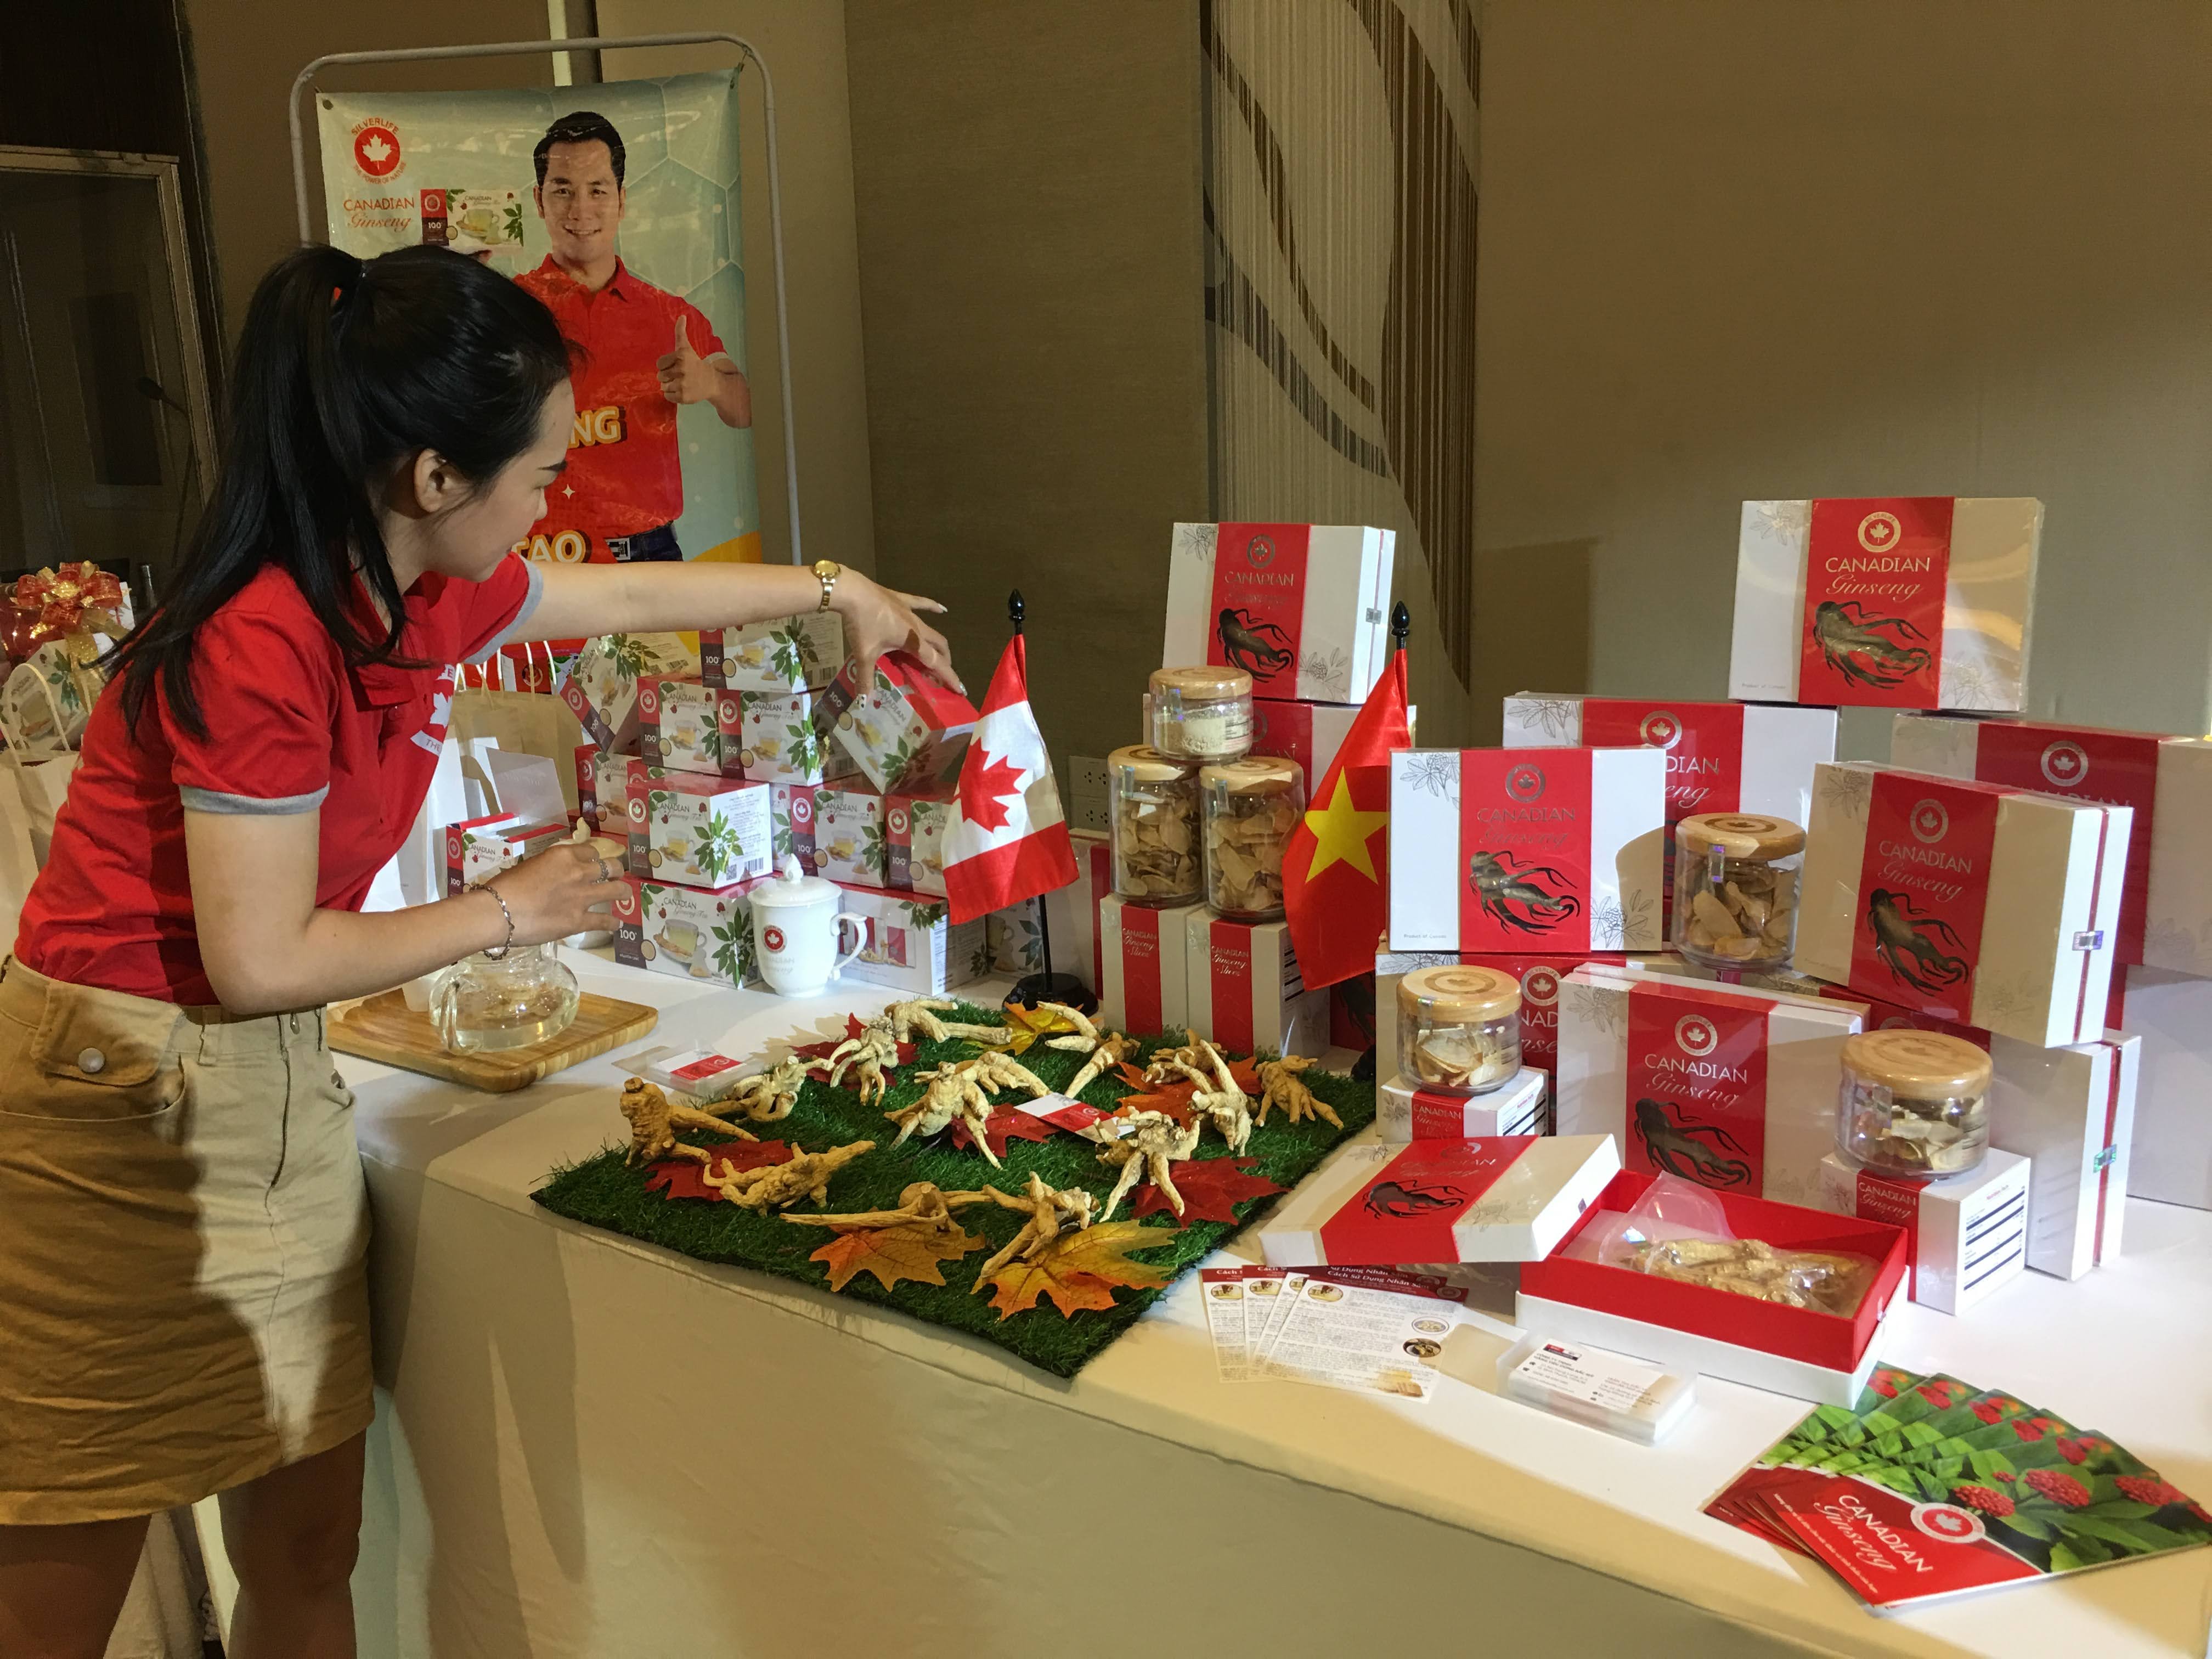 A staff prepares products from Canadian ginseng displayed at an event to promote Canadian ginseng hosted by the Consulate General of Canada in Ho Chi Minh City in January. Photo: Dong Nguyen/ Tuoi Tre News